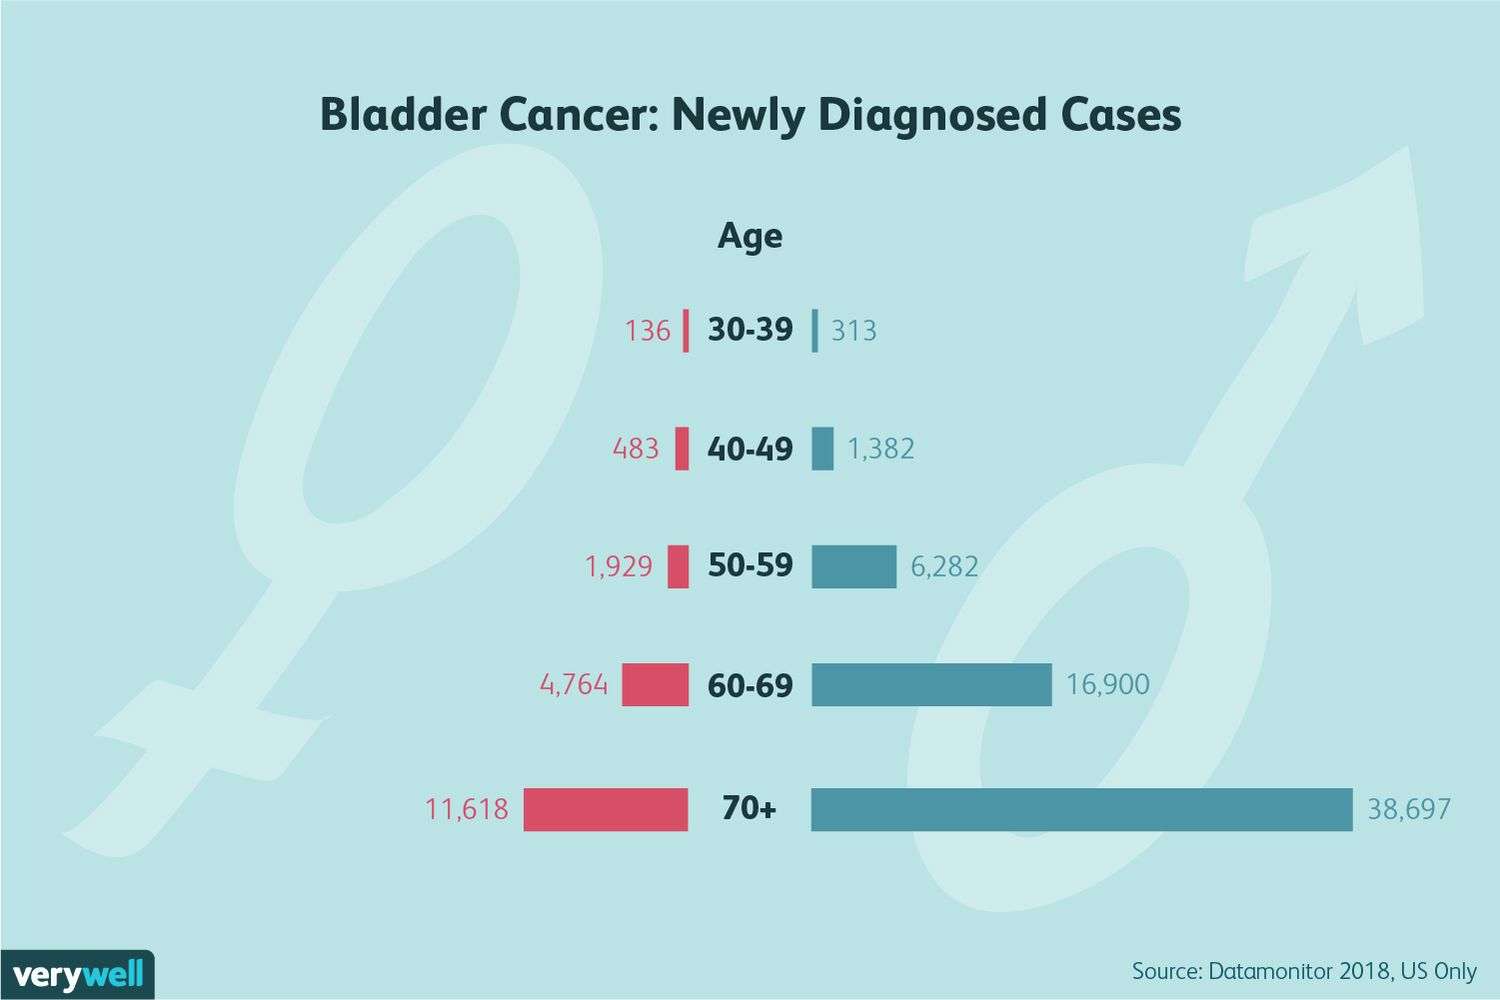 Causes and Risk Factors of Bladder Cancer